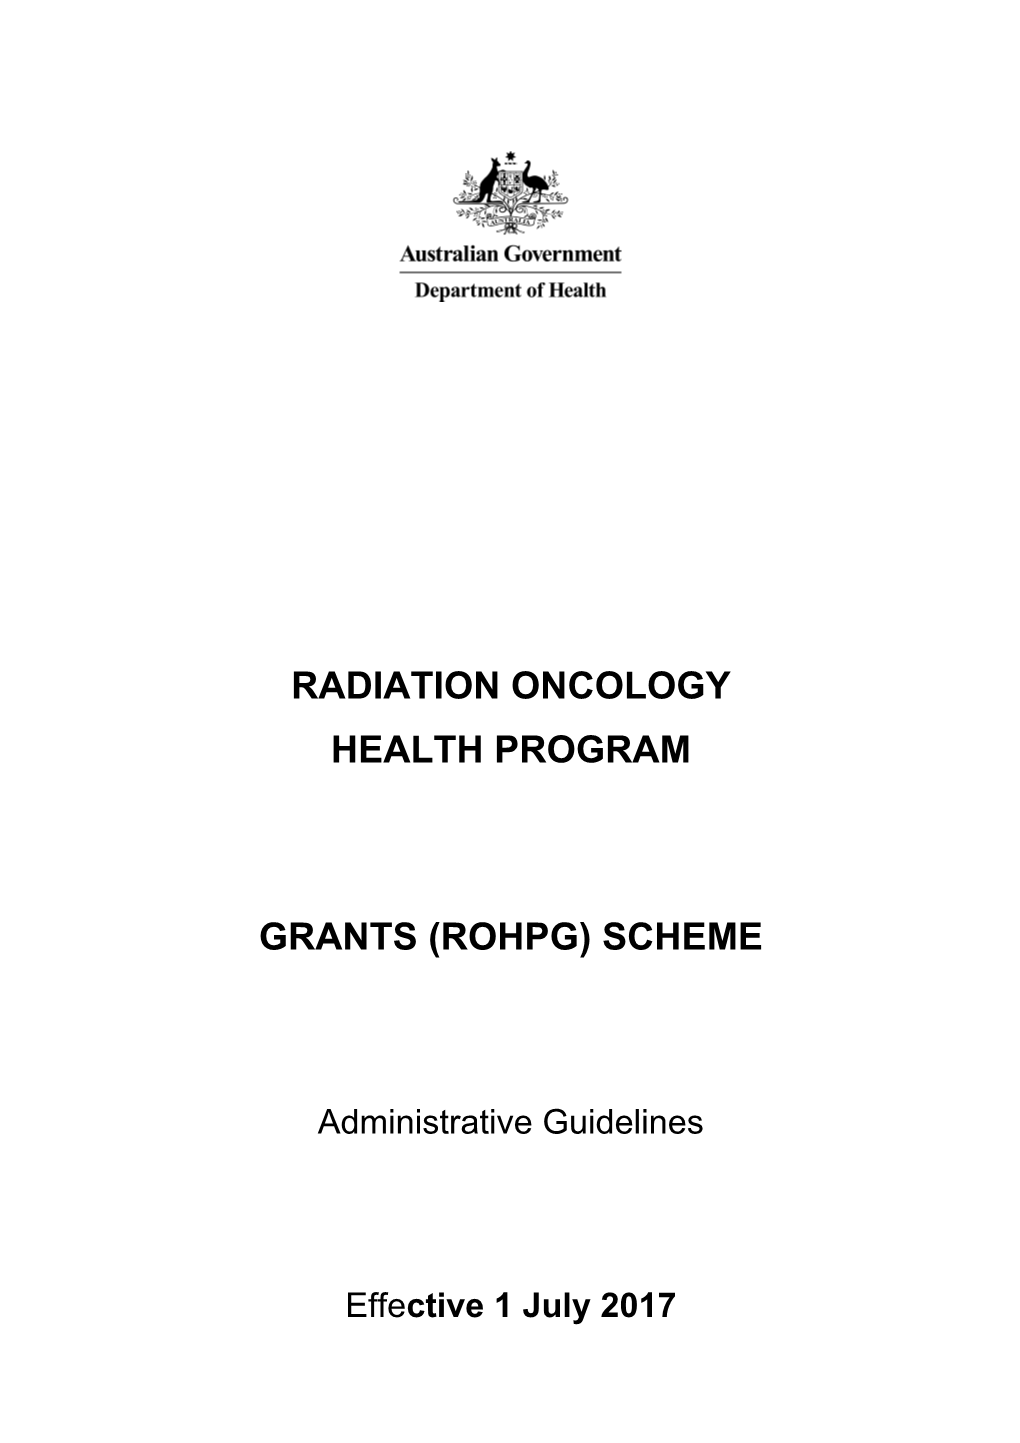 ROHPG Scheme Administrative Guidelines 1 July 2017